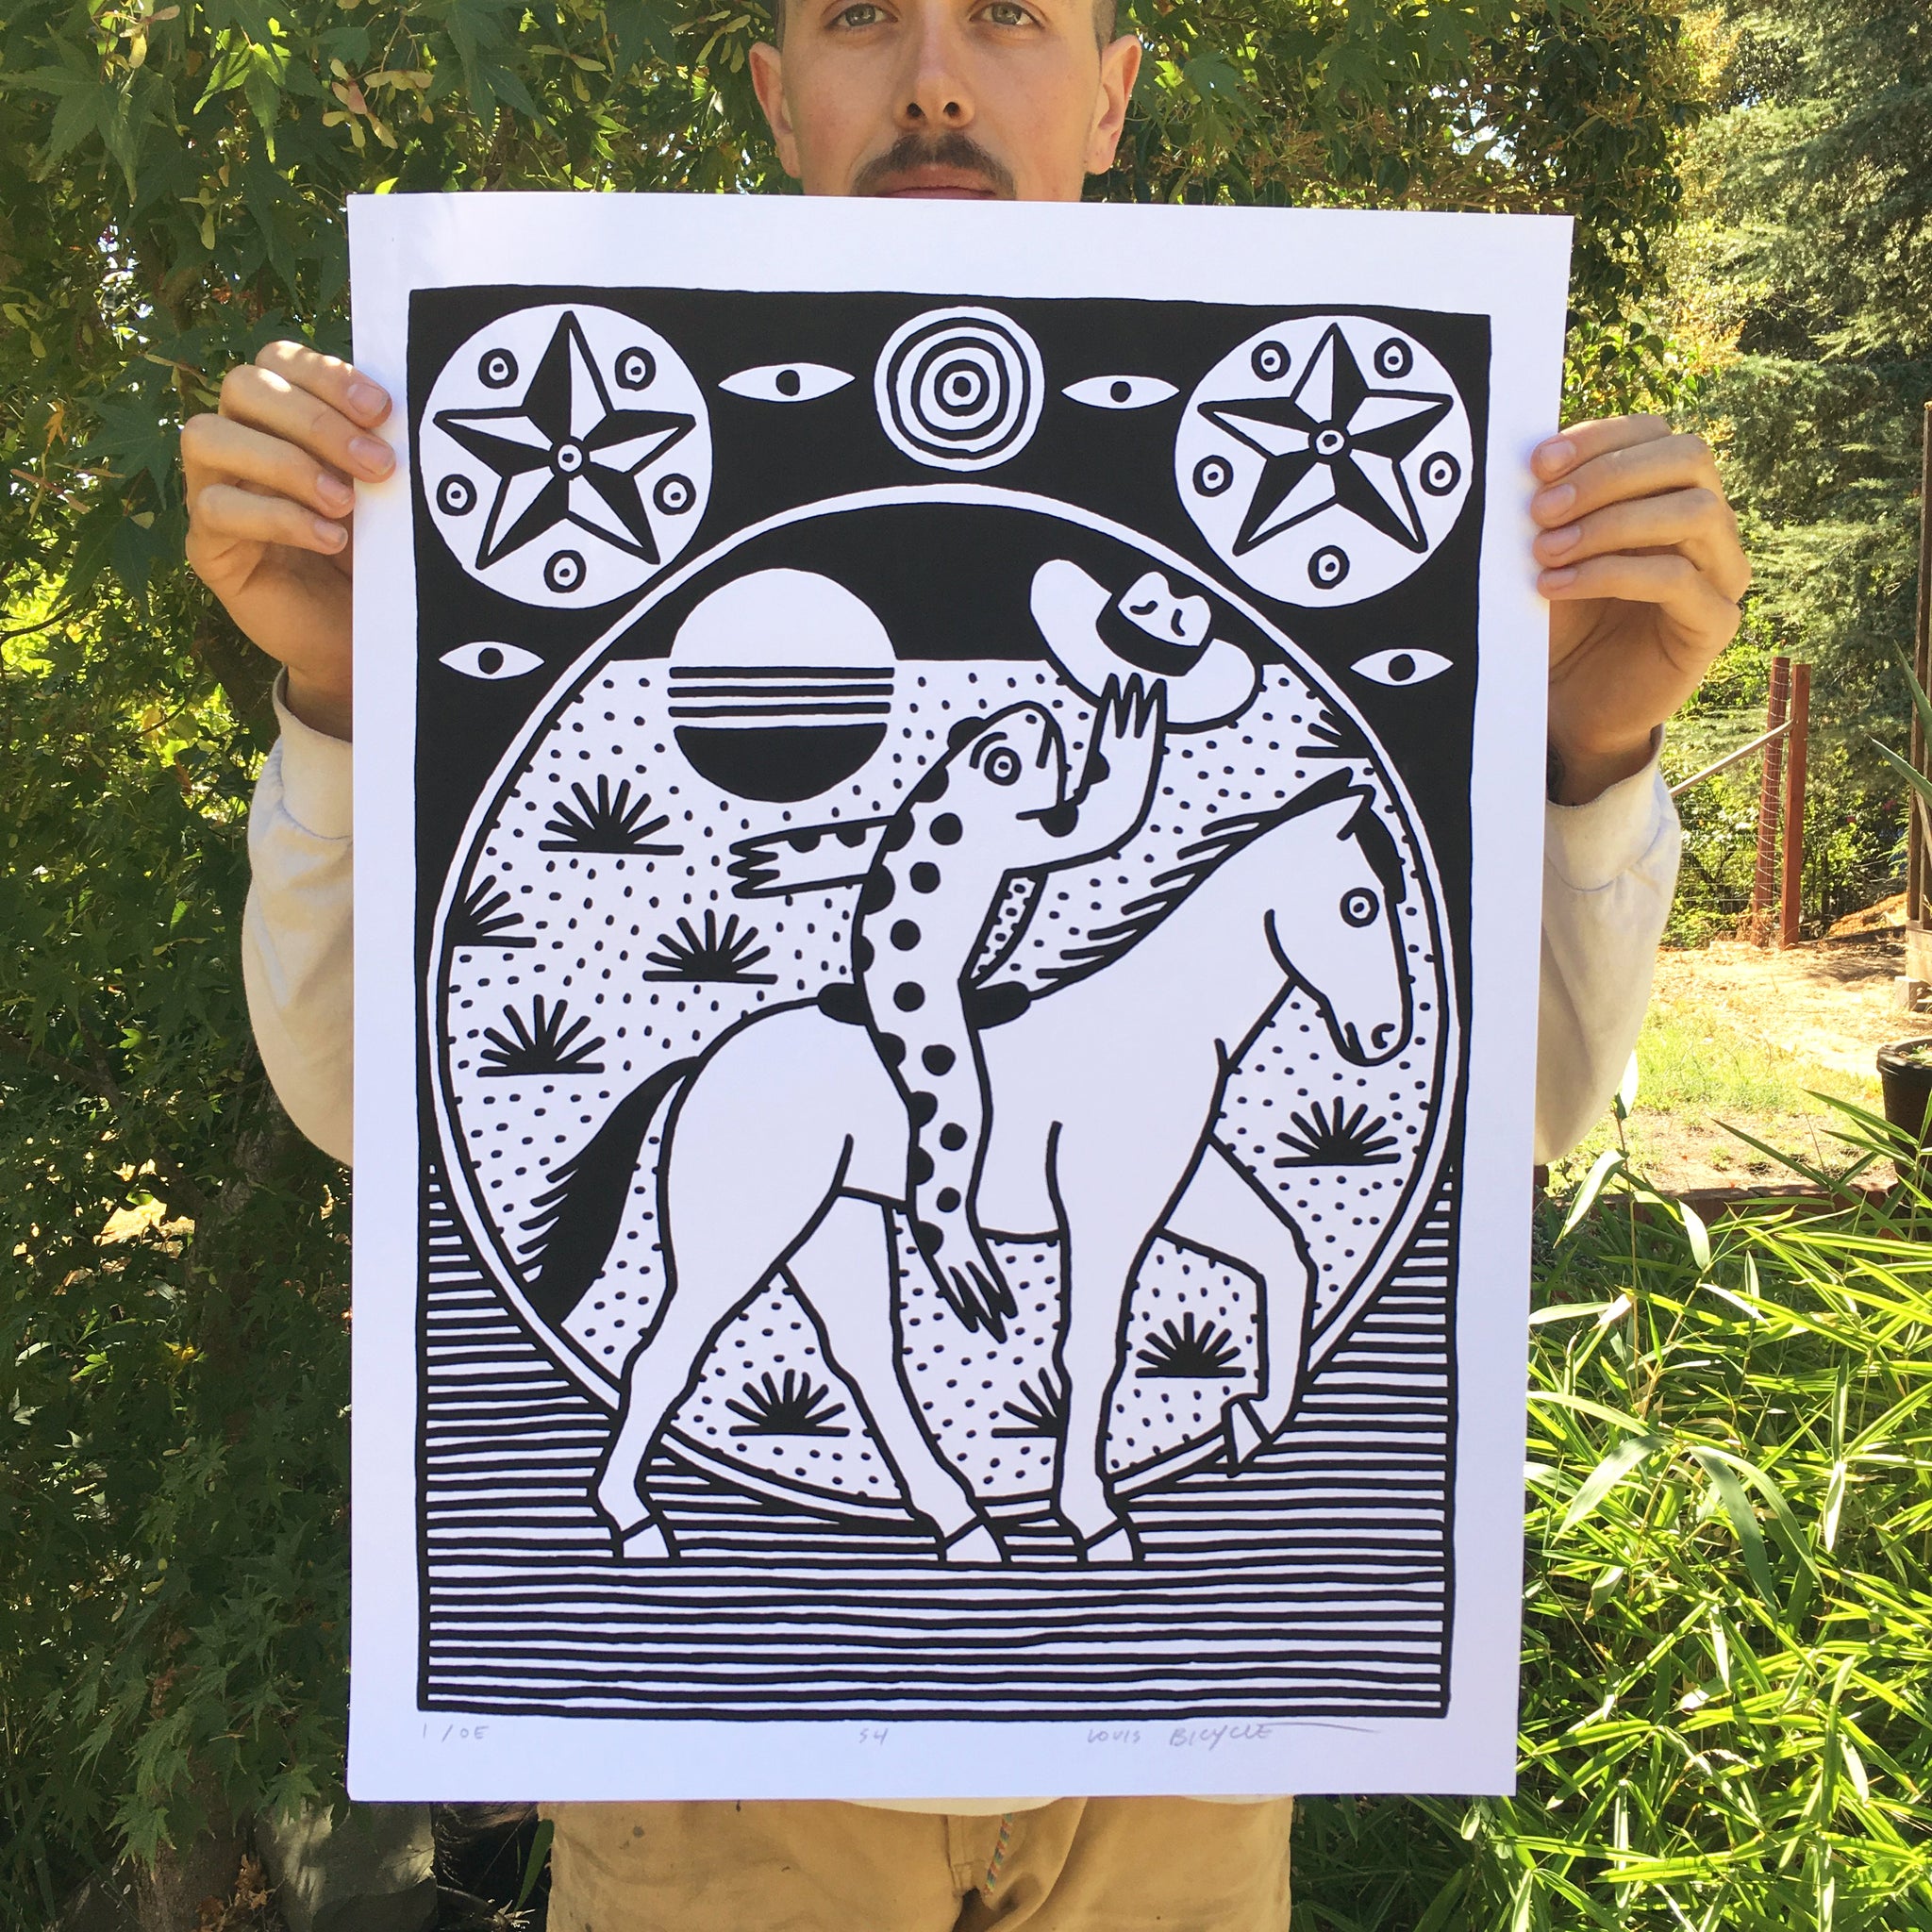 Cowboy frog riding a horse. Screen printed poster by Louis Bicycle.